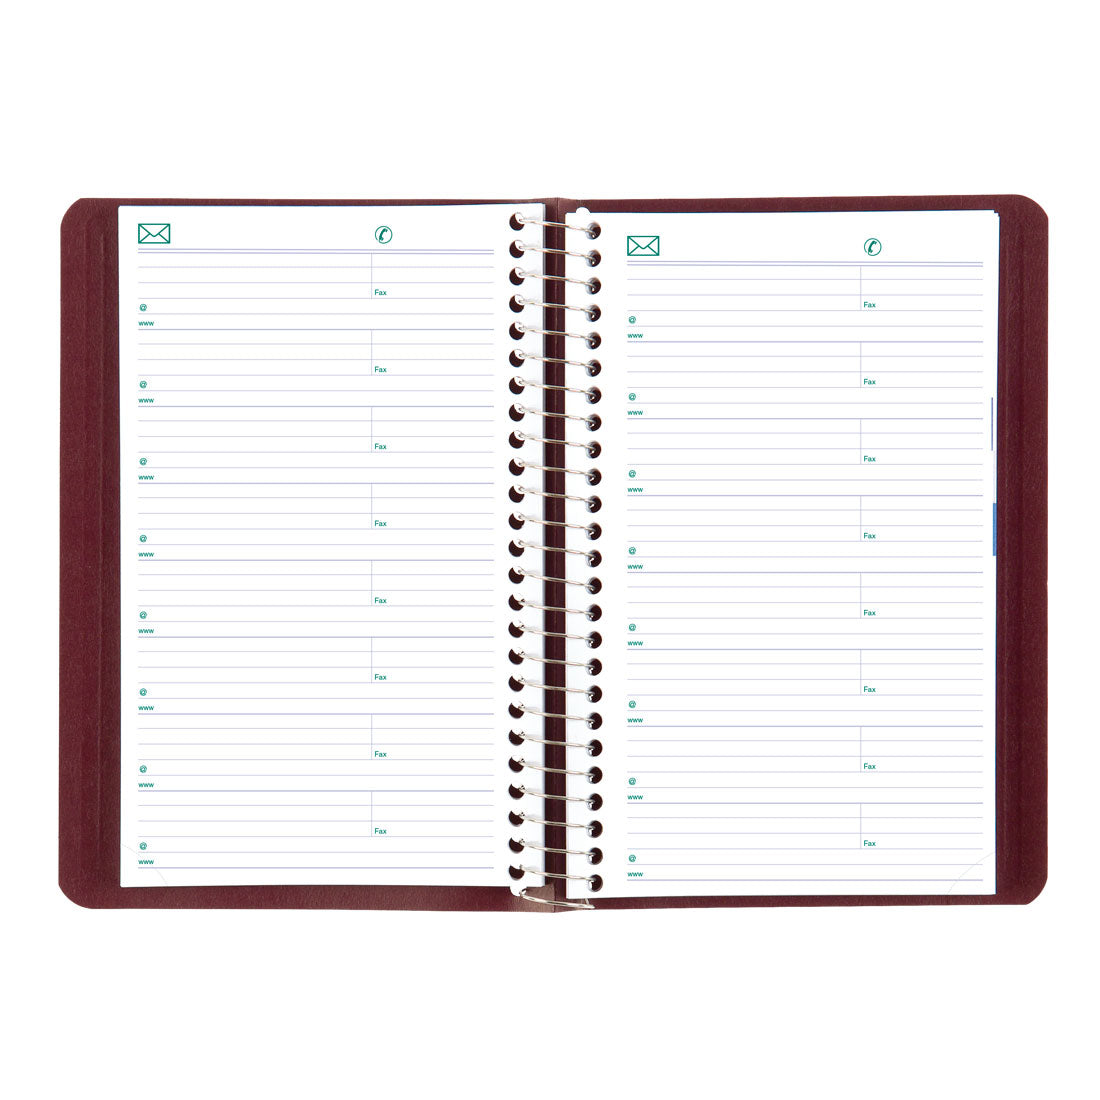 Essential Daily Planner 2025, English, C1504.83T#colour_burgundy